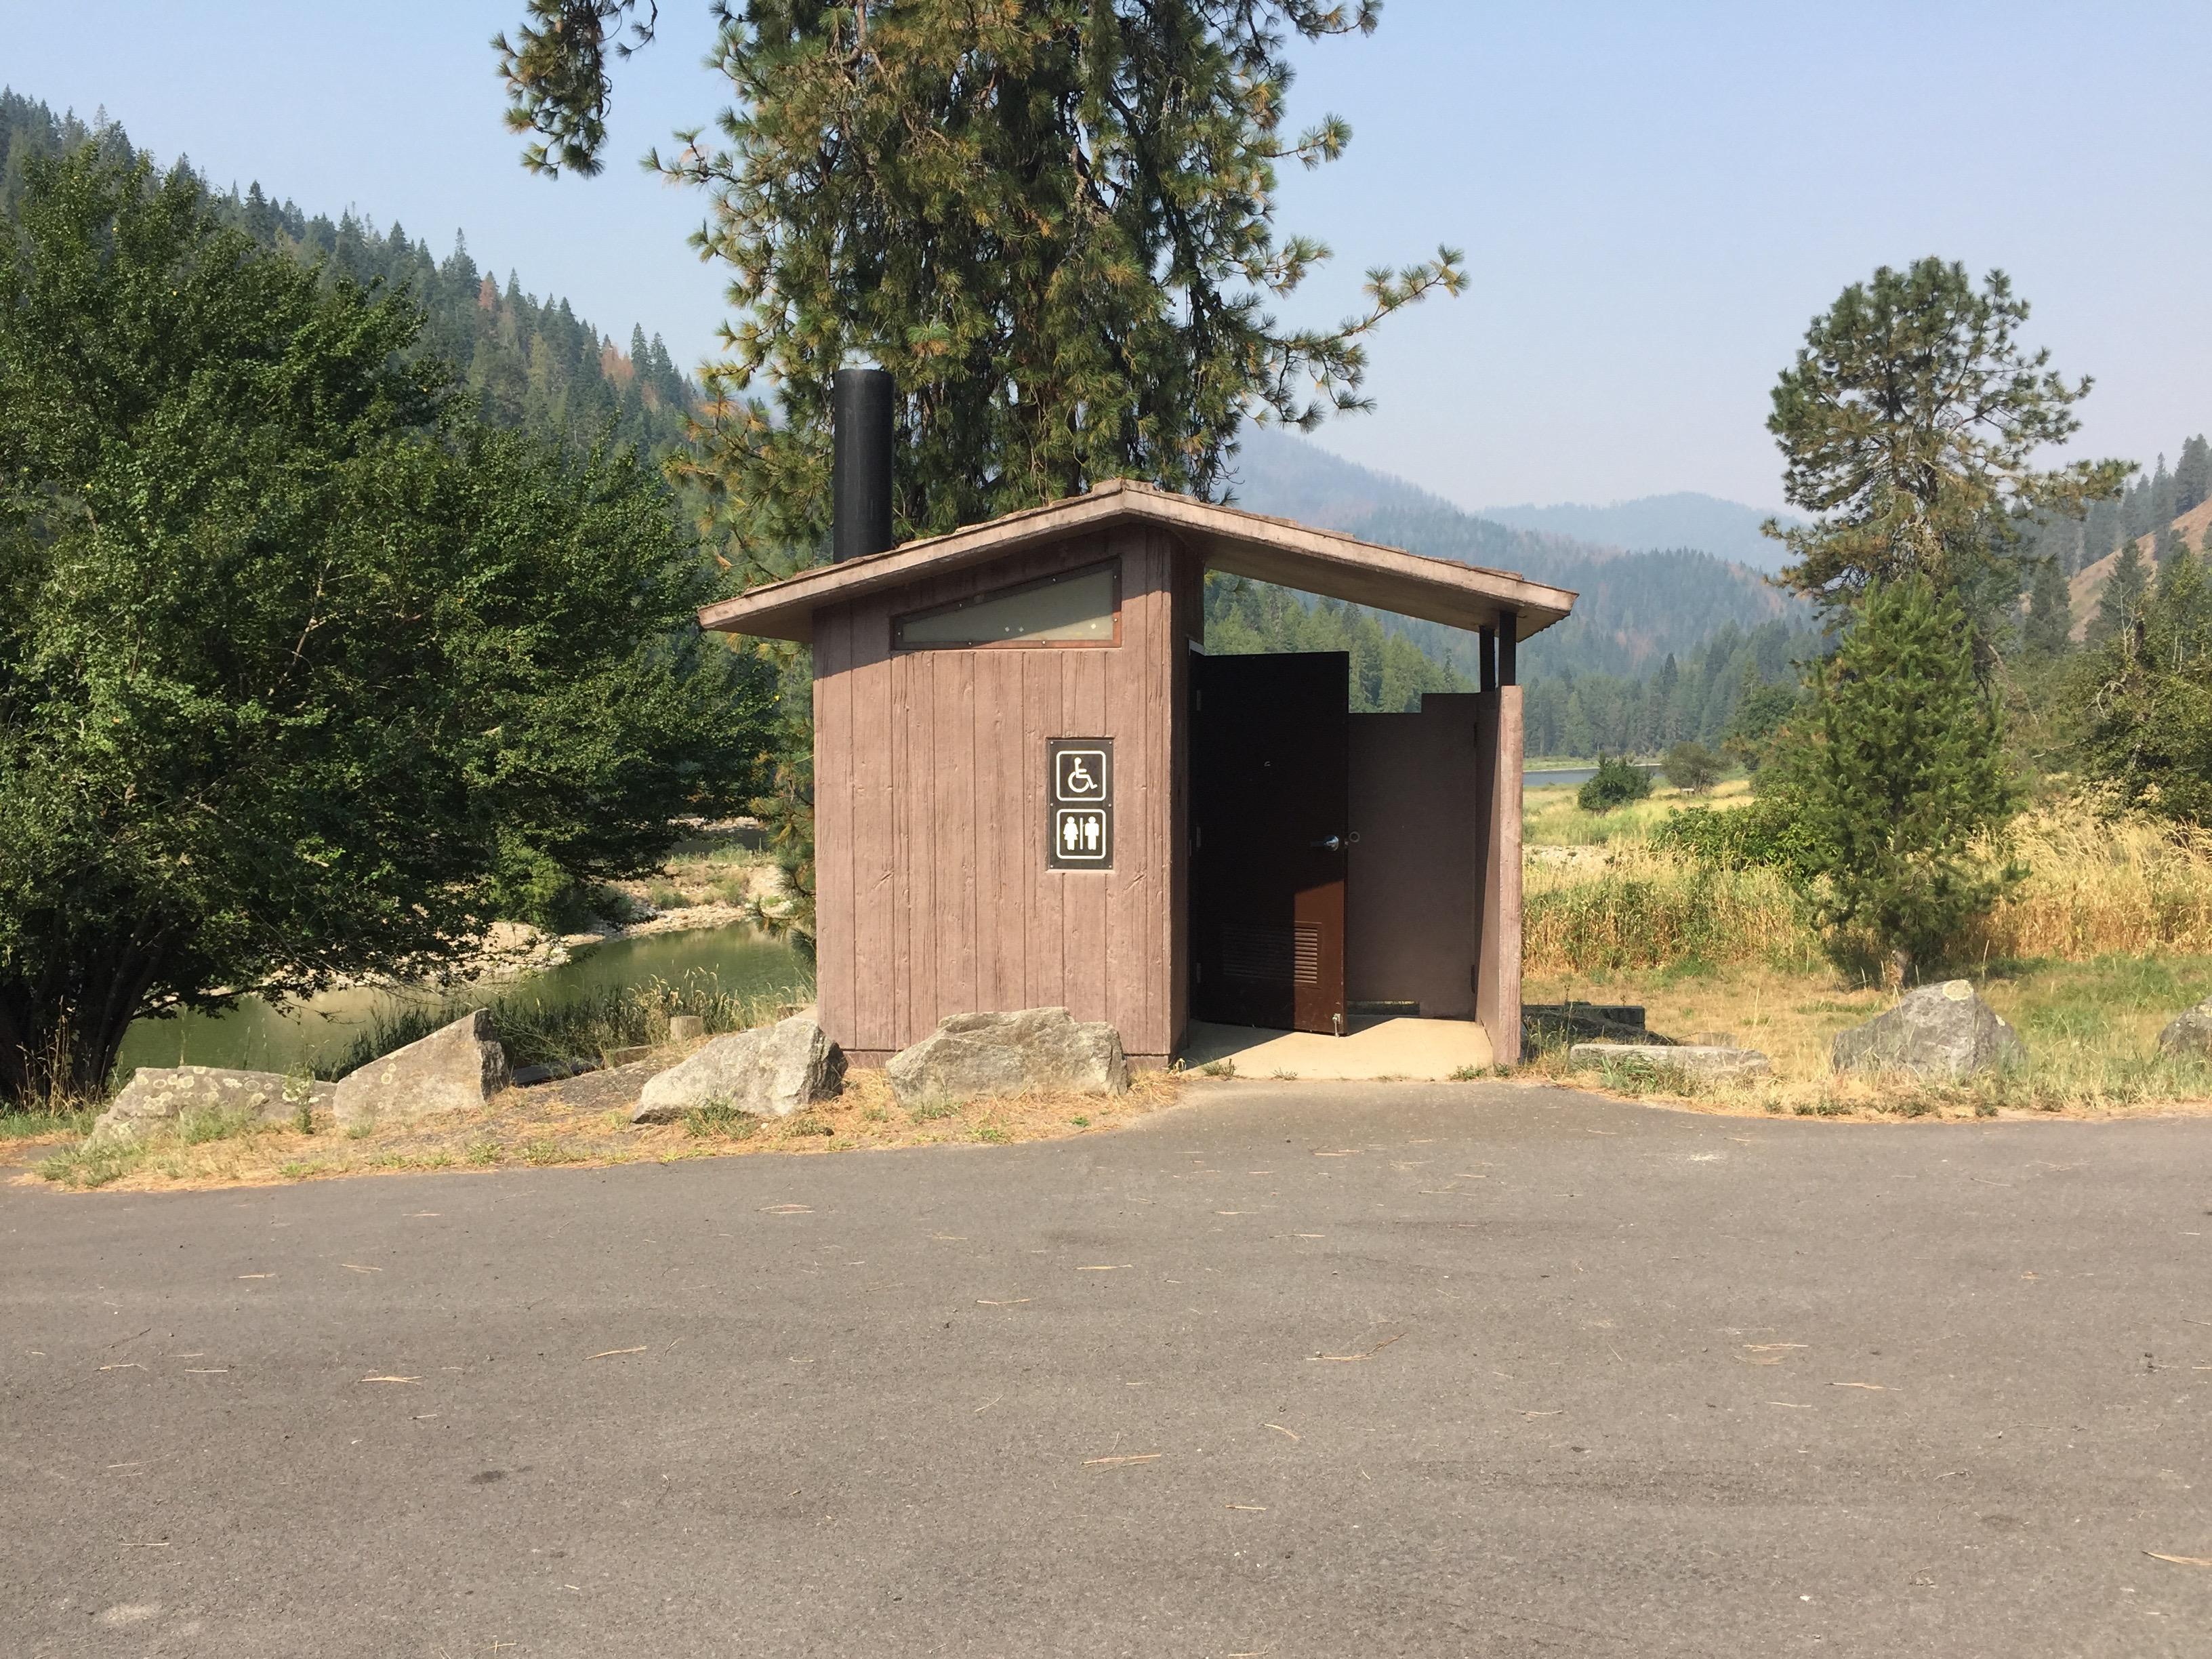 Fenn Pond Access restroom outhouse wide shot August 2015